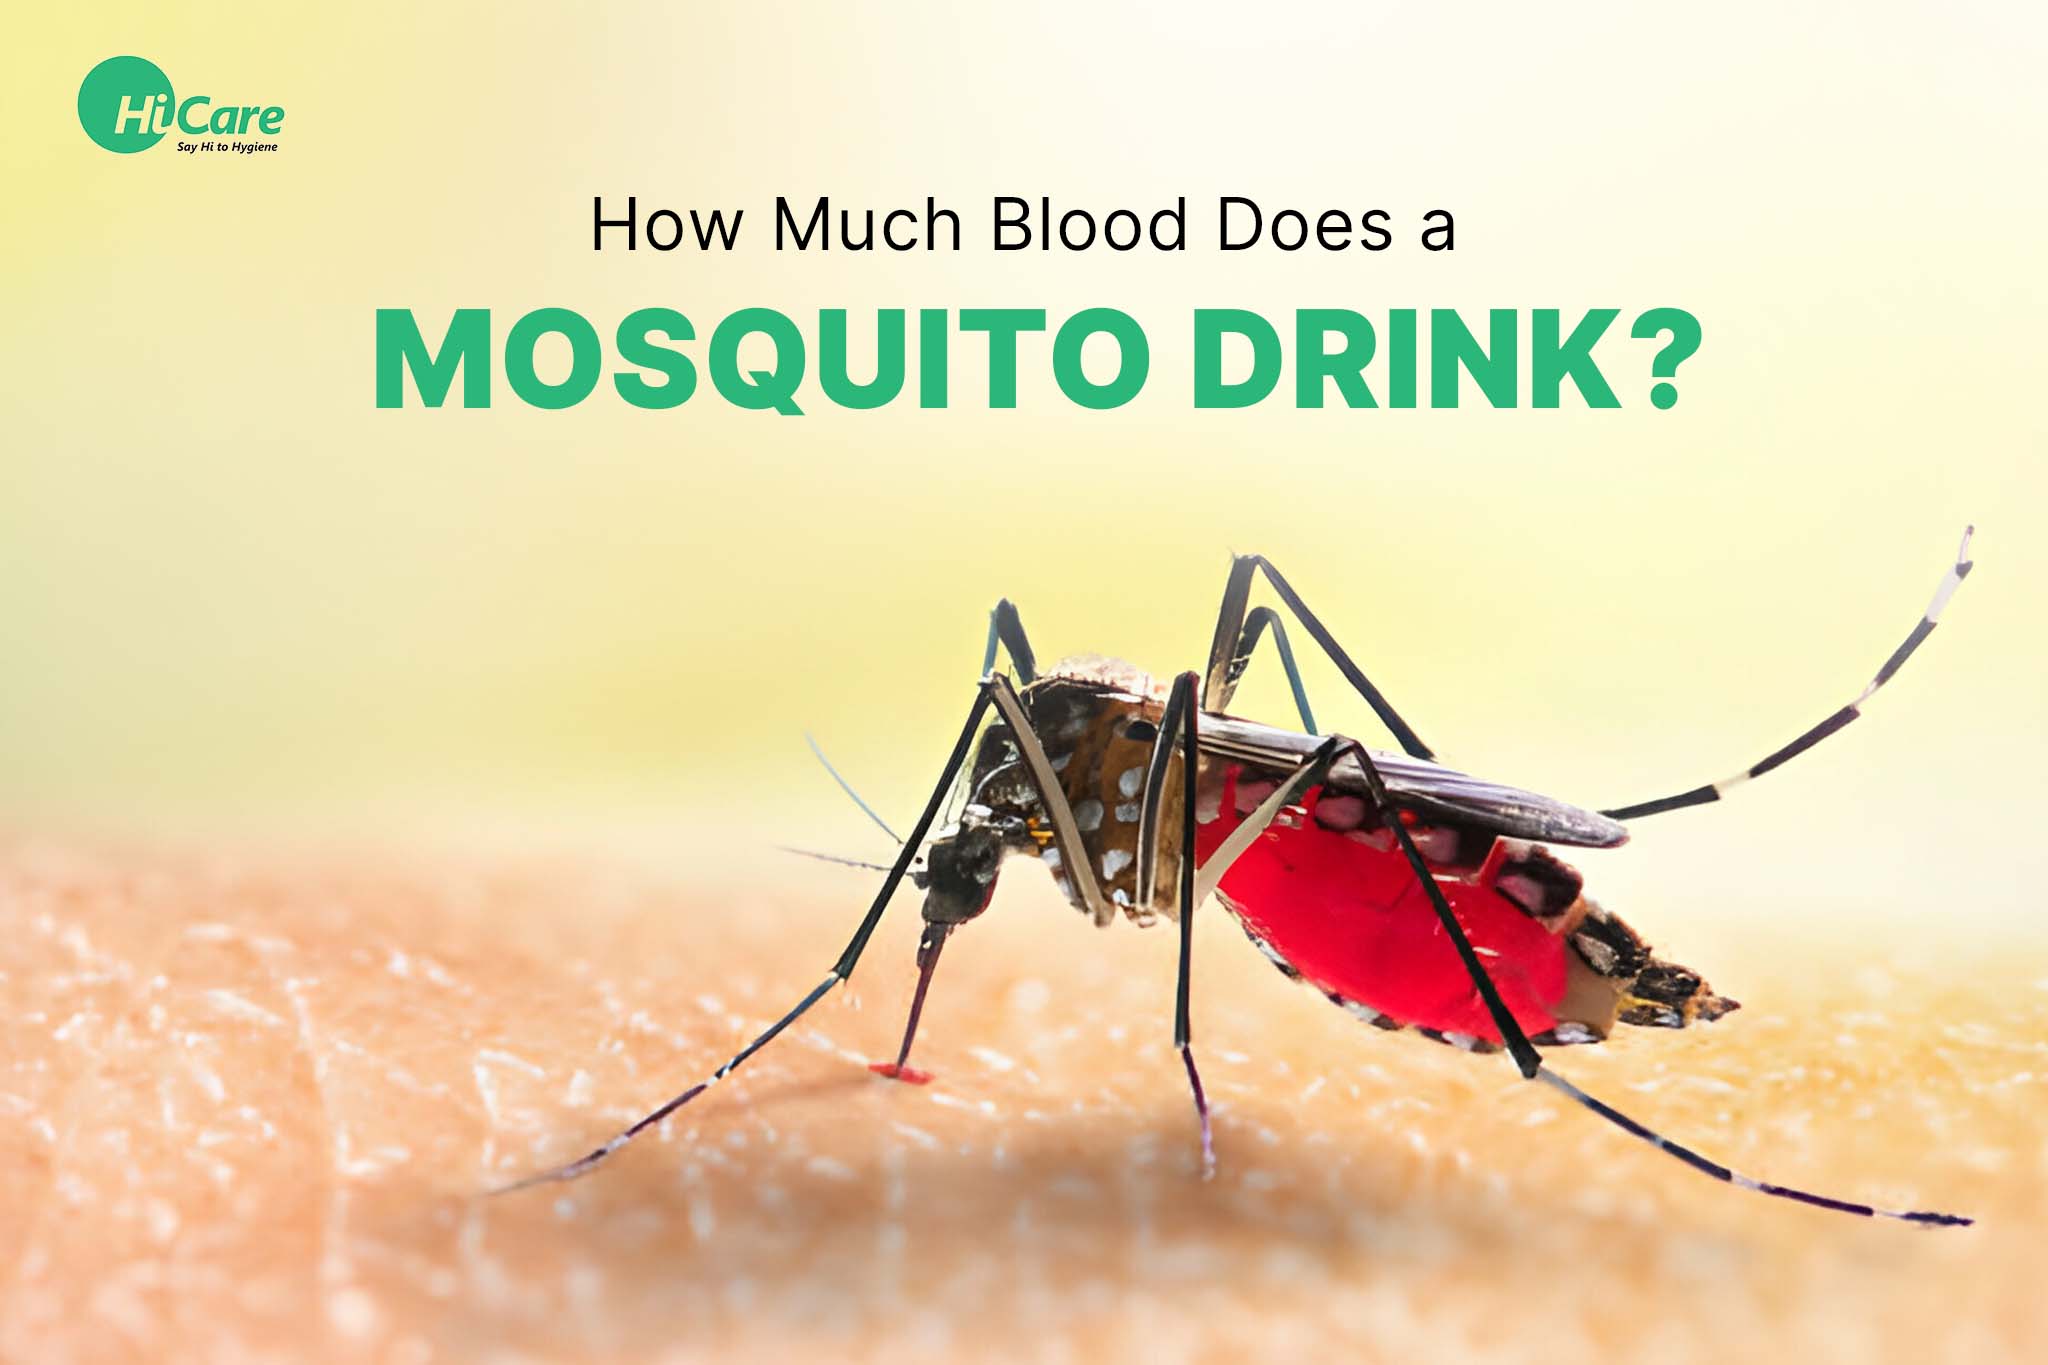 How Much Blood Does a Mosquito Drink?